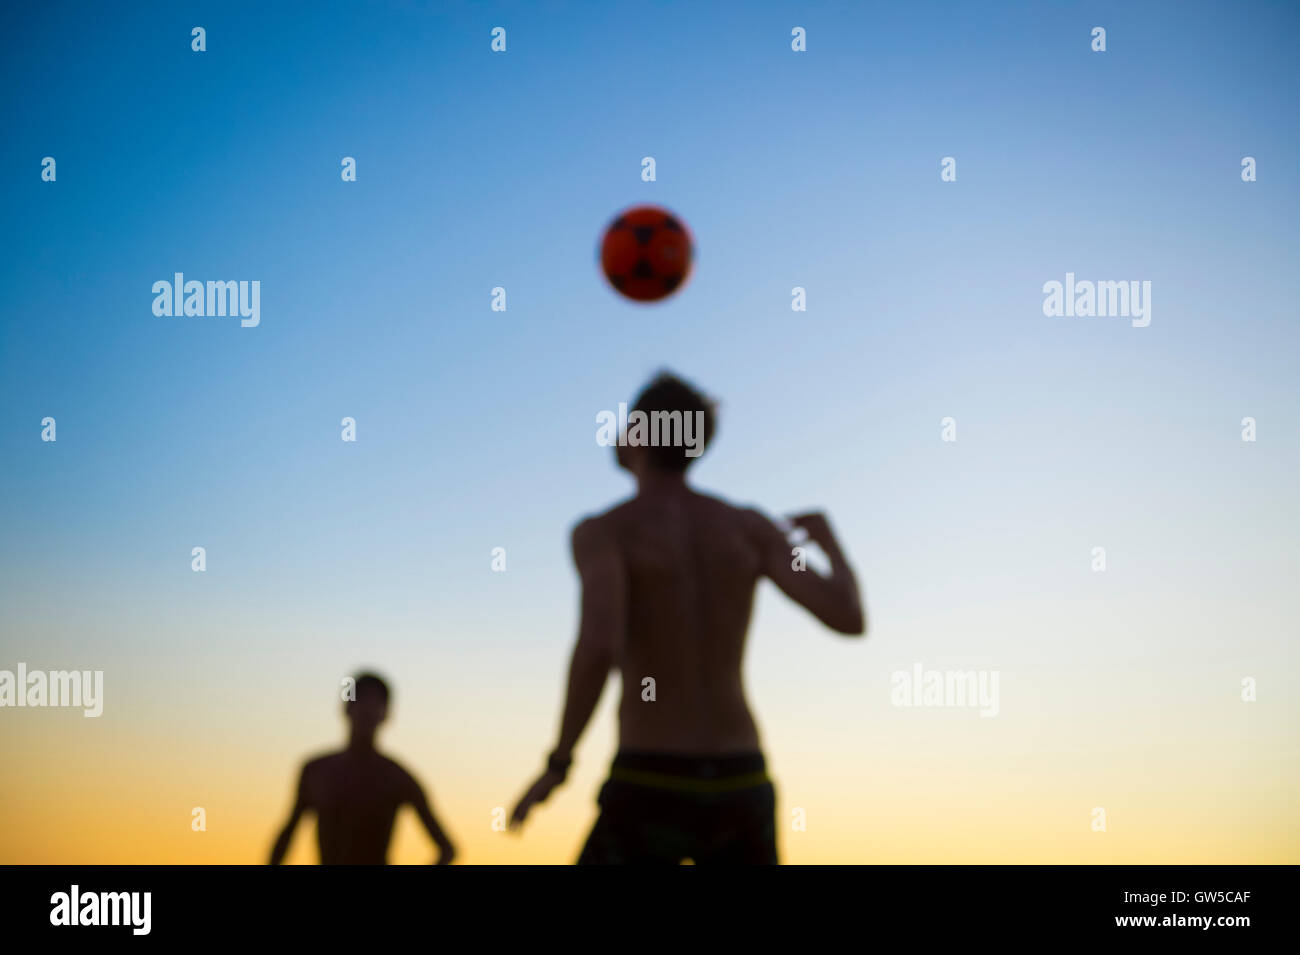 Brazilian beach footvolley game played in defocus silhouette against the sunset sky in Rio de Janeiro, Brazil Stock Photo